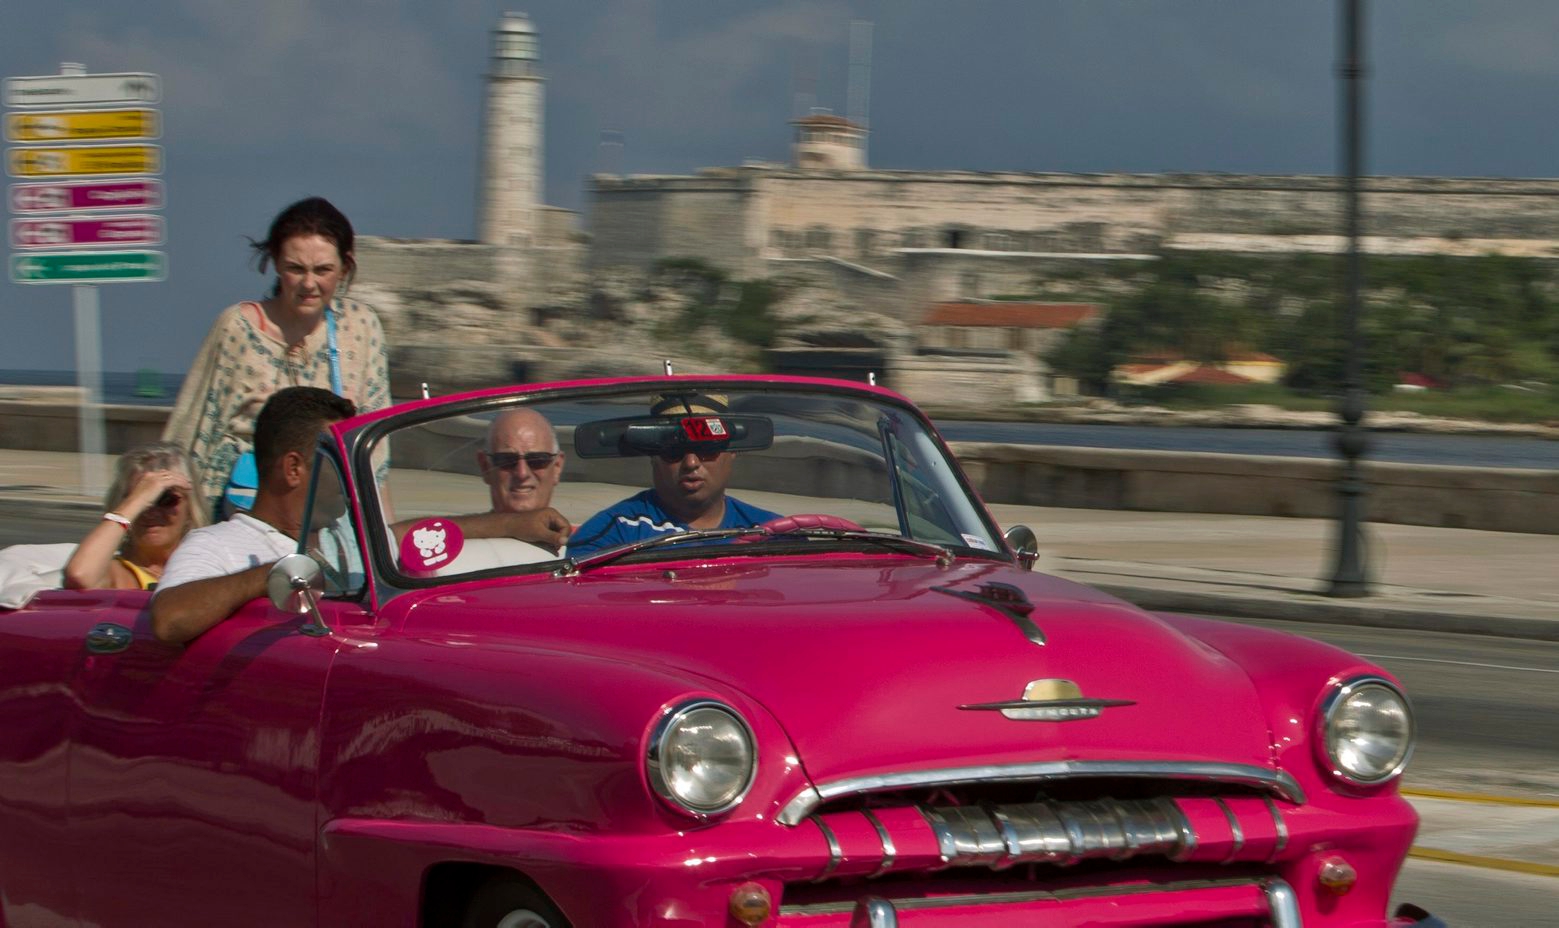 In this Oct. 15, 2014 photo, tourists ride in a classic American car on the Malecon in Havana, Cuba. Those lucky enough to have a pre-revolutionary car can earn money legally by ferrying tourists _ or Cubans celebrating weddings _ along Havanaís waterfront Malecon boulevard. (AP Photo/Franklin Reyes) Cuba Classic Cars